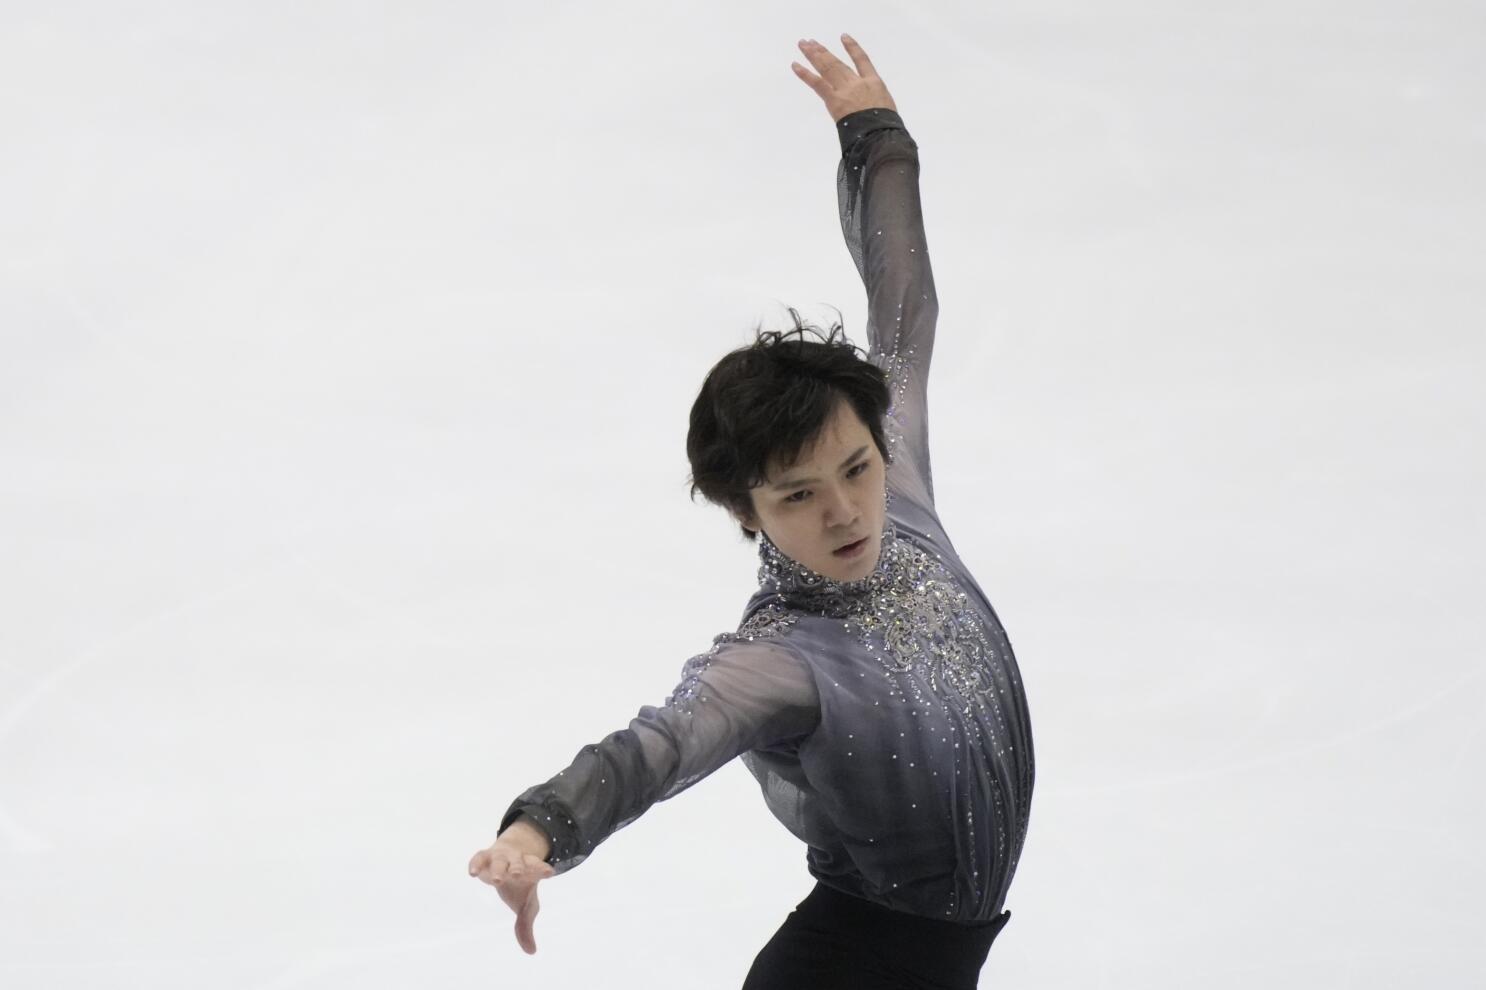 Shoma Uno takes lead over Zhou after men's short at NHK Trophy in Japan